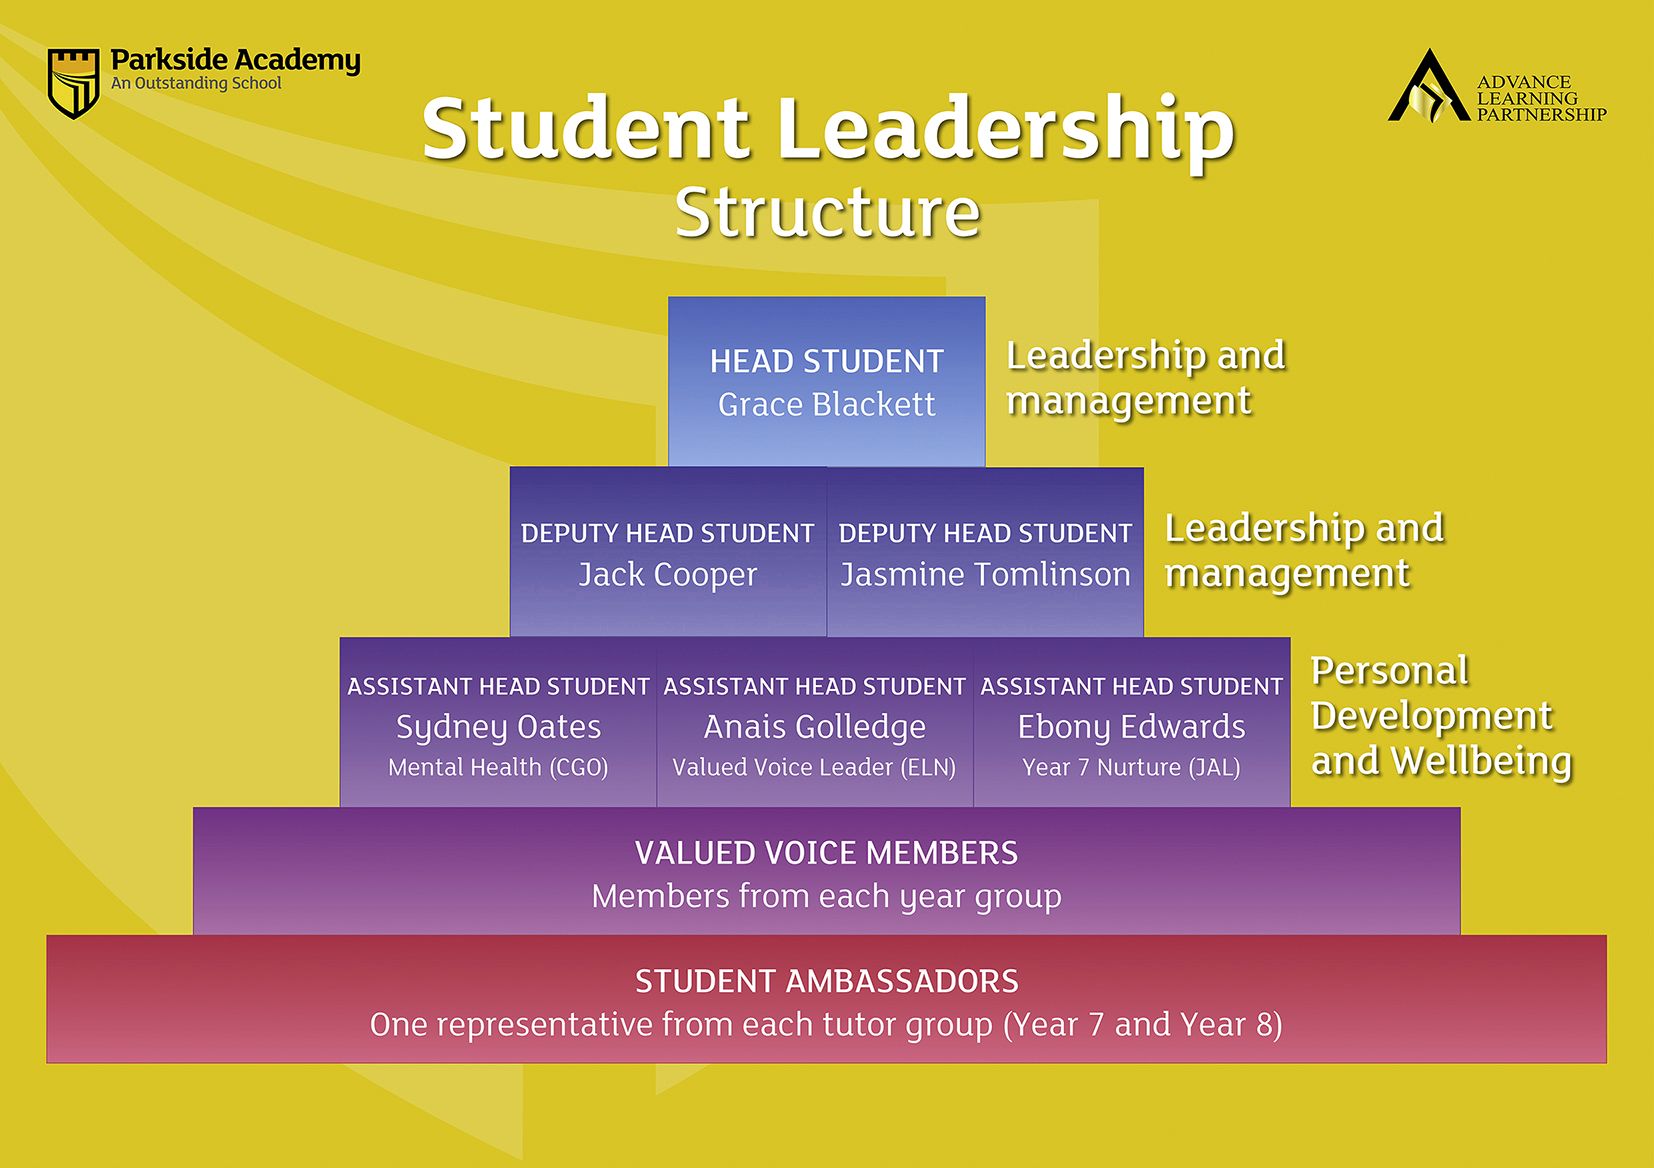 Student leadership structure